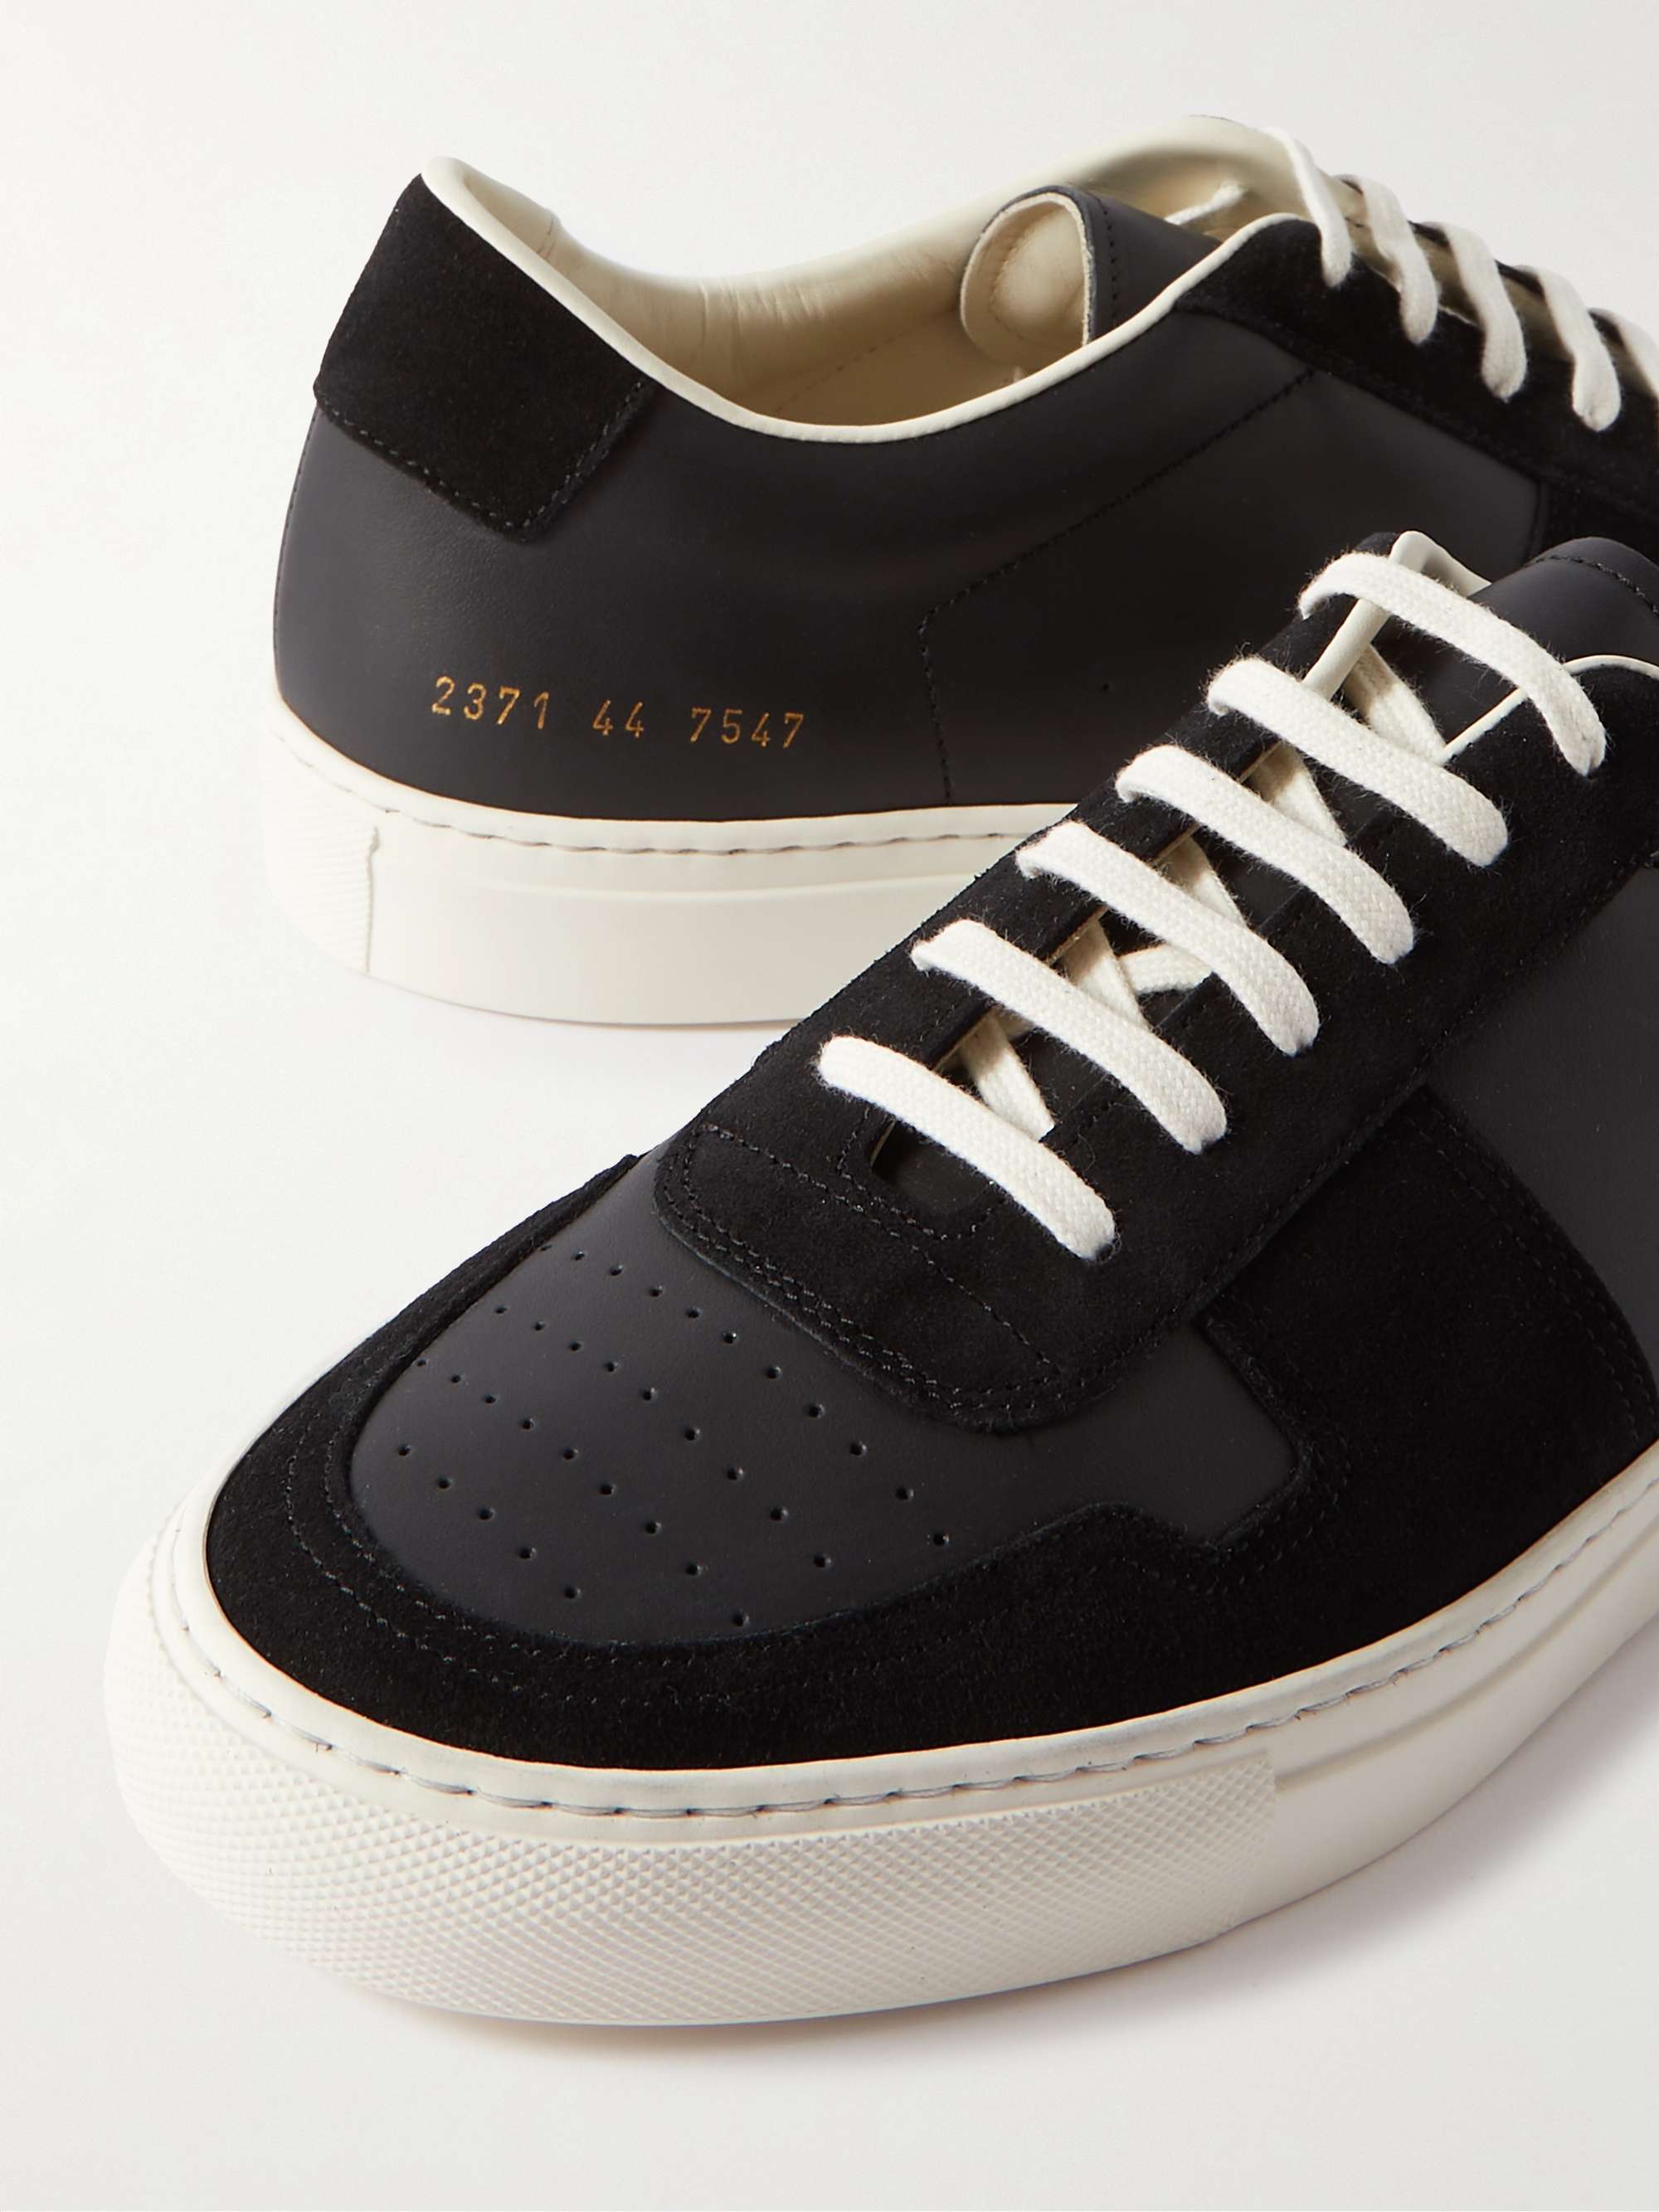 COMMON PROJECTS Bball Suede-Trimmed Leather Sneakers | MR PORTER